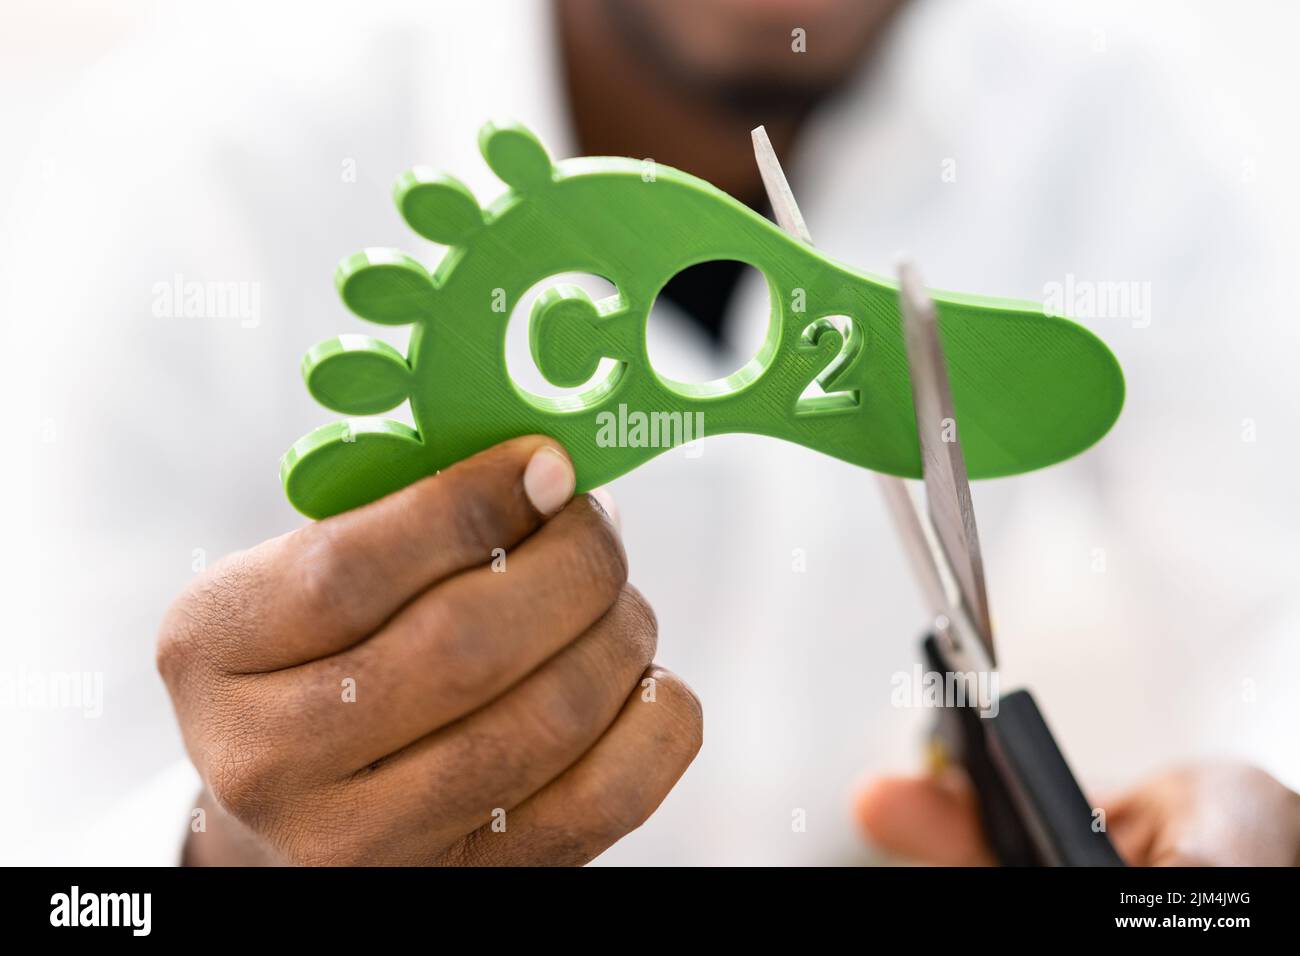 Carbon Dioxide Footprint Sign. Co2 Reduction. Green Environment Stock Photo